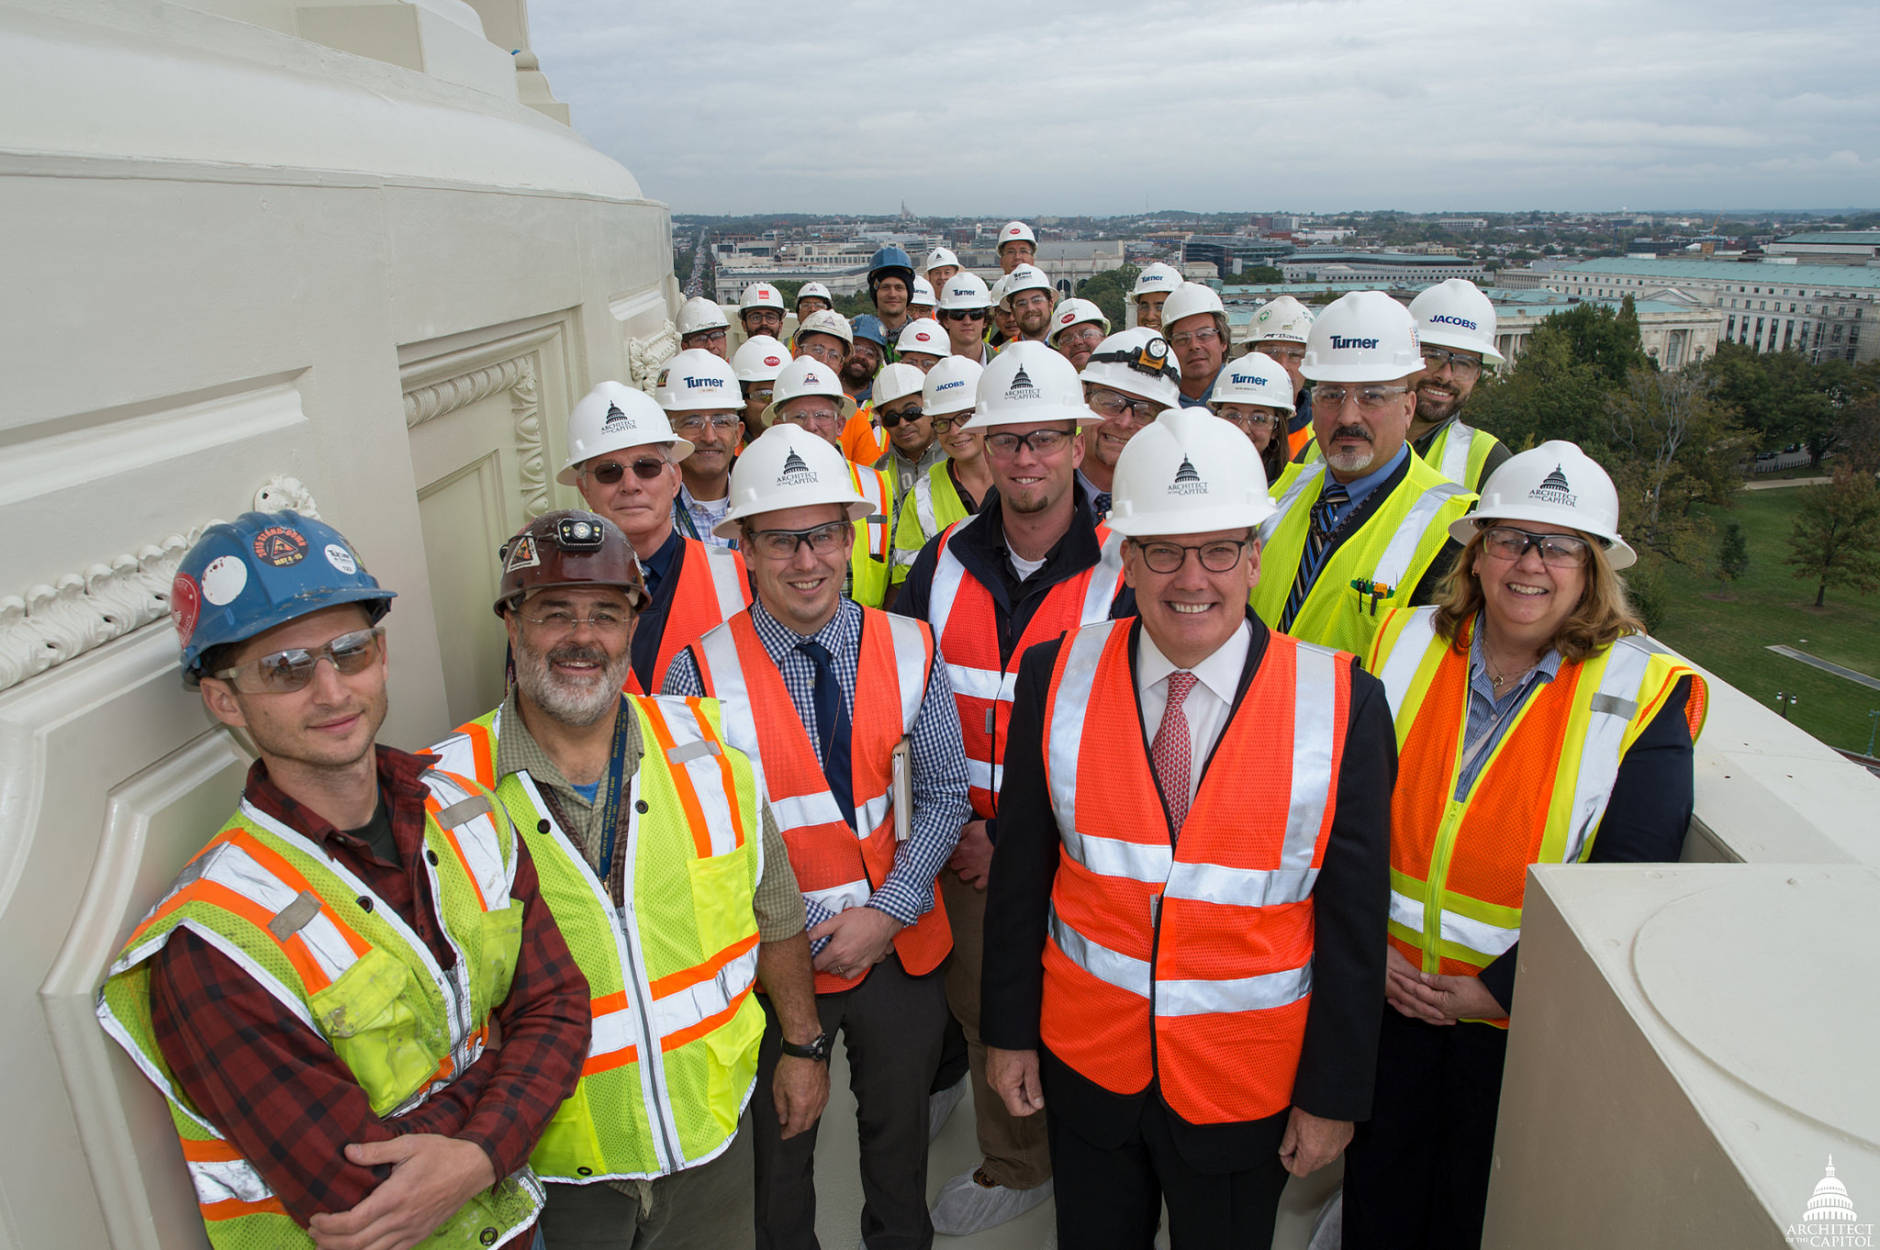 The Honorable Stephen T. Ayers, FAIA, LEED AP, Architect of the Capitol, joined members of the Dome Restoration team to attach the final restored ornament, a rosette, to the U.S. Capitol Dome. (Architect of the Capitol)